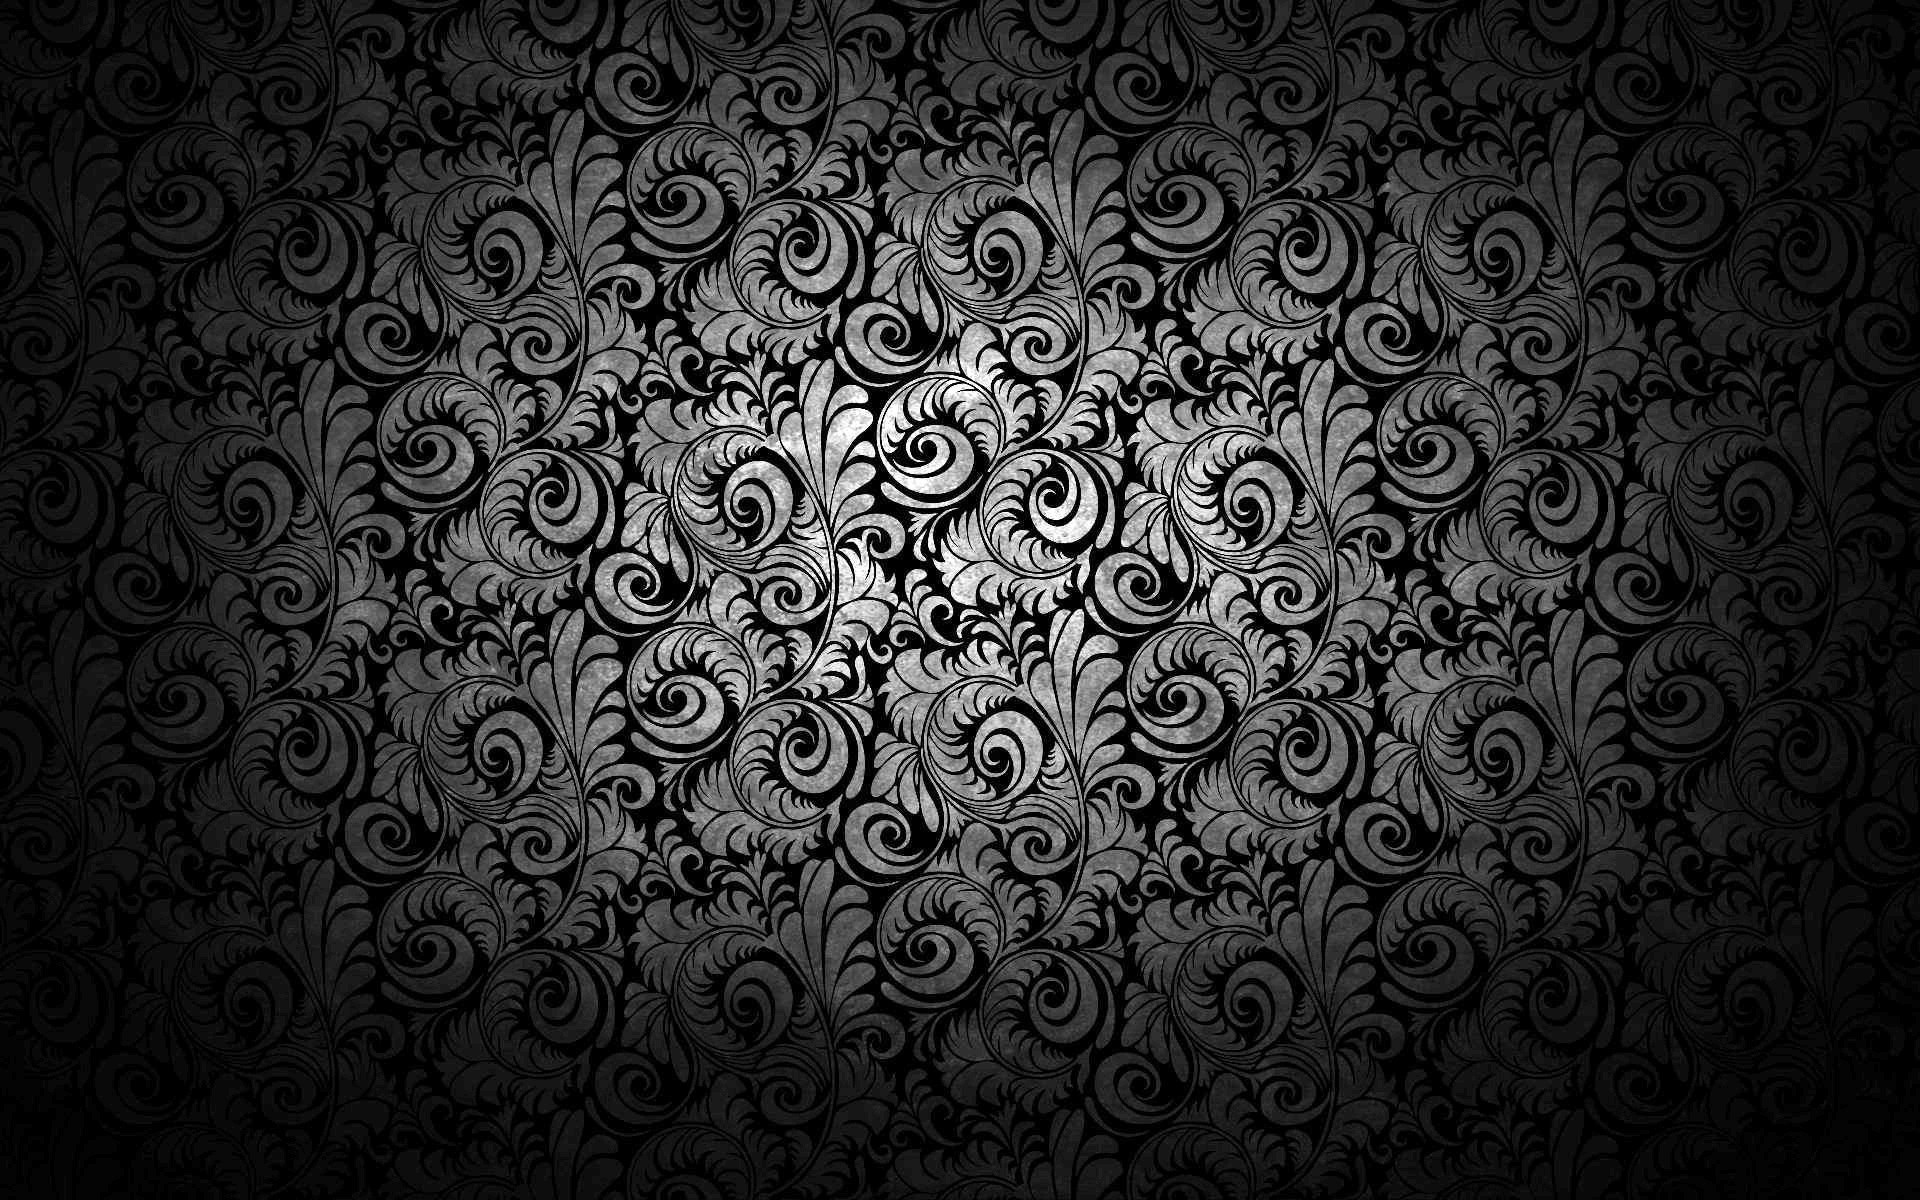 1920x1200 Title : black abstract wallpaper hd widescreen picture image gallery |  ÑÐ¾Ð½Ñ. Dimension : 1920 x 1200. File Type : JPG/JPEG